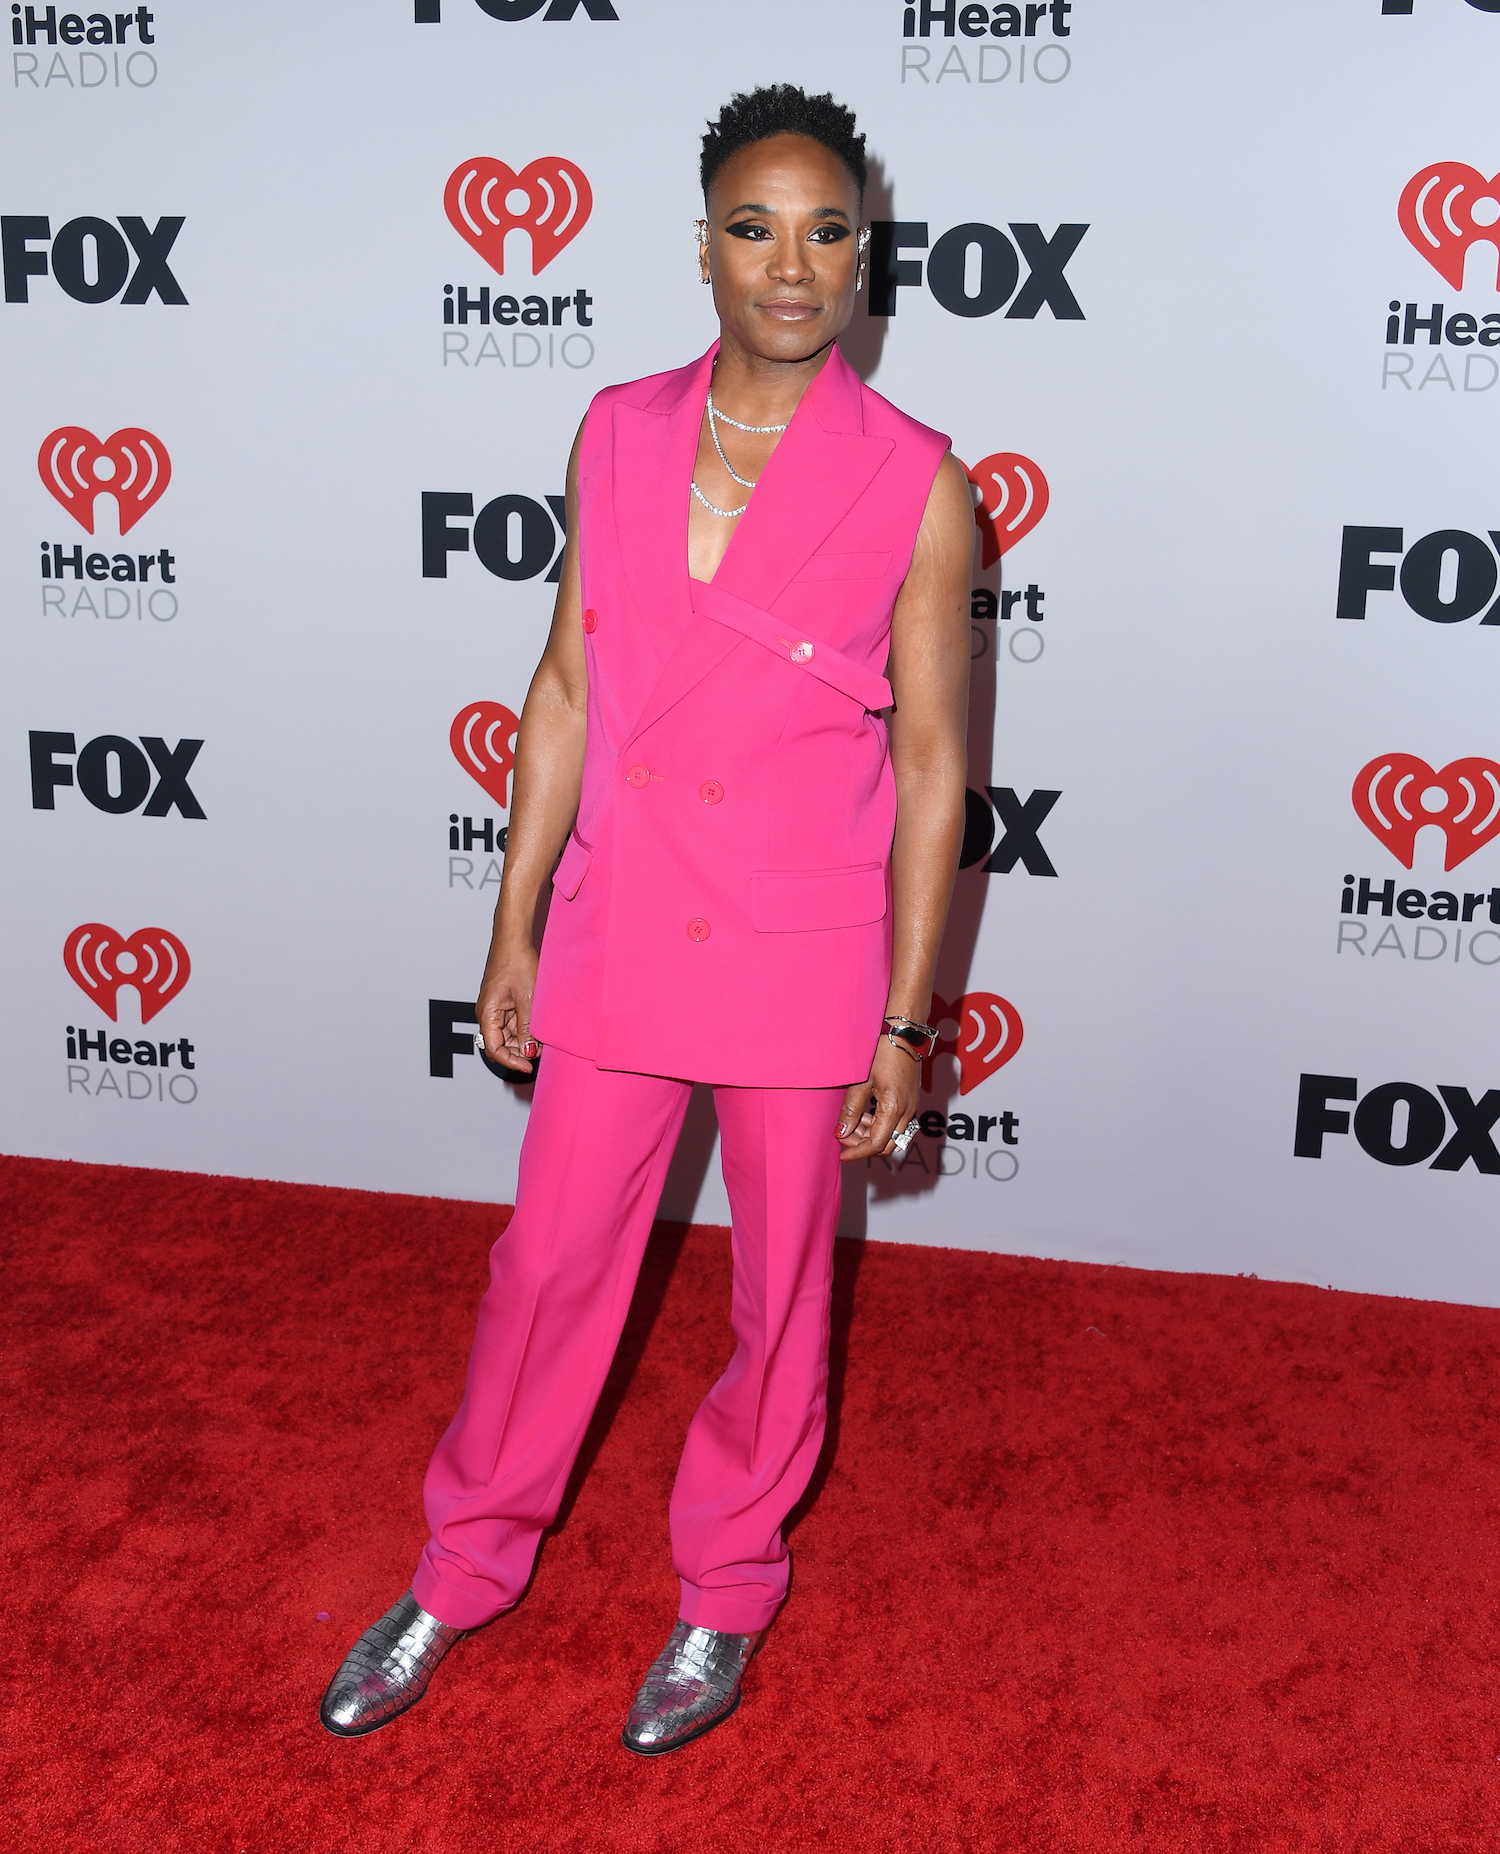 Billy Porter attends the 2022 iHeartRadio Music Awards